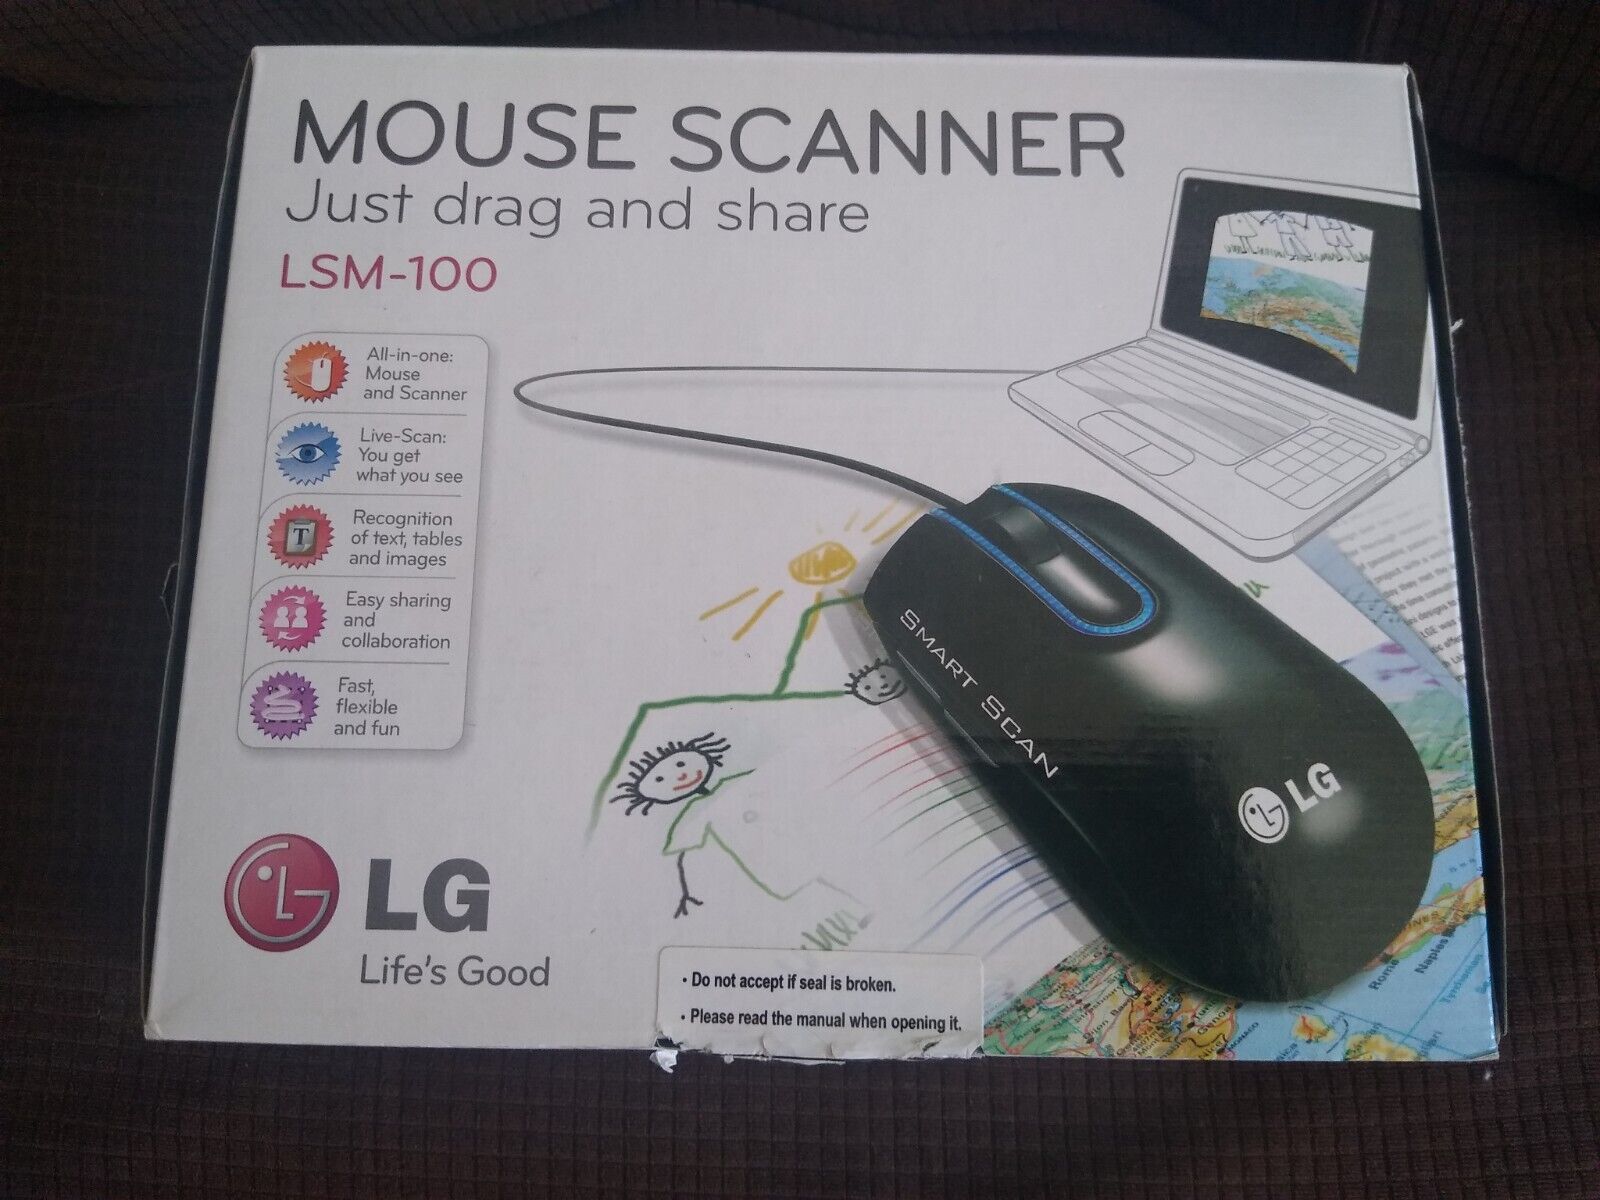 LG Mouse Scanner LSM- 100 just drag and share. NIOB